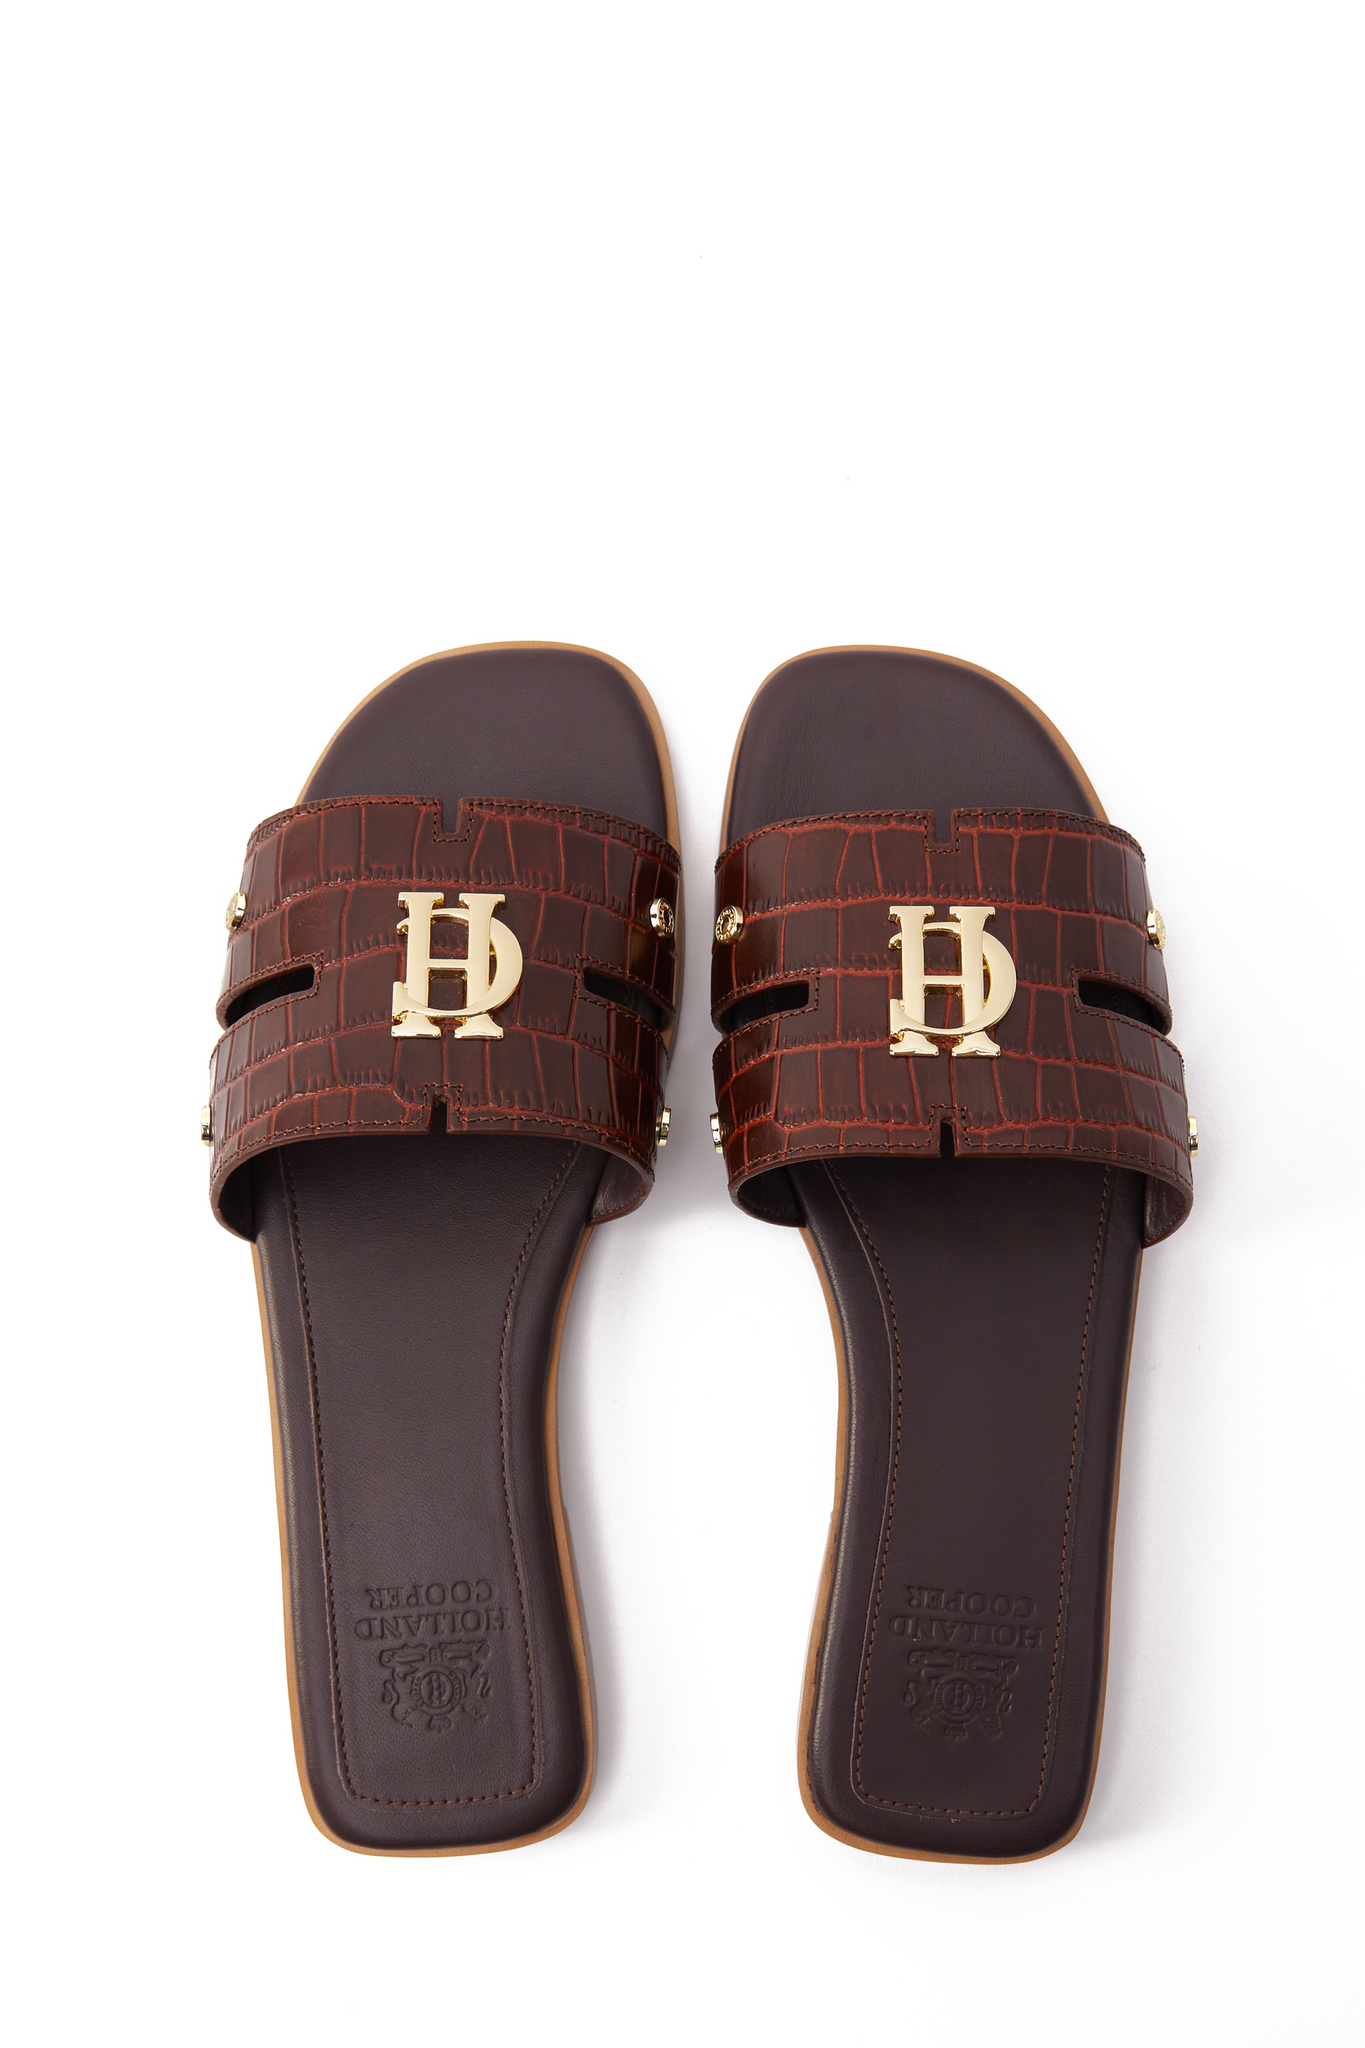 Birds eye view of brown croc embossed leather sliders with a tan leather sole and gold hardware